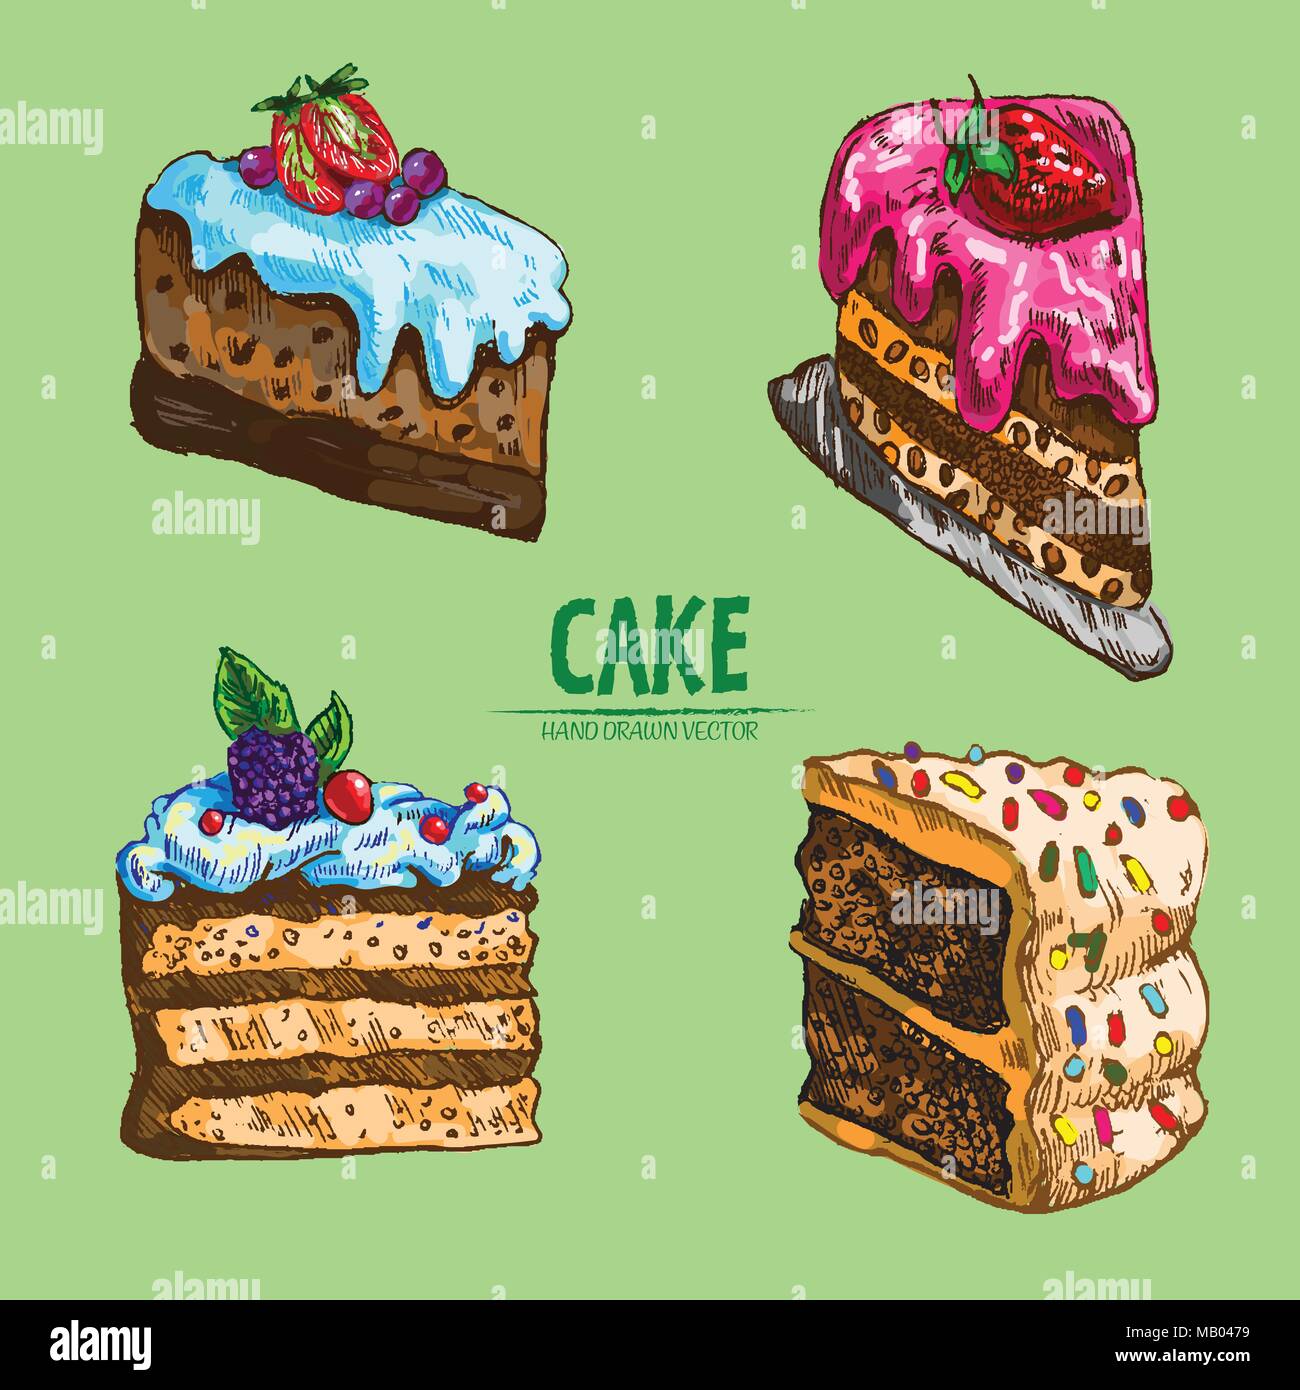 15715 Slice Cake Drawing Images Stock Photos  Vectors  Shutterstock